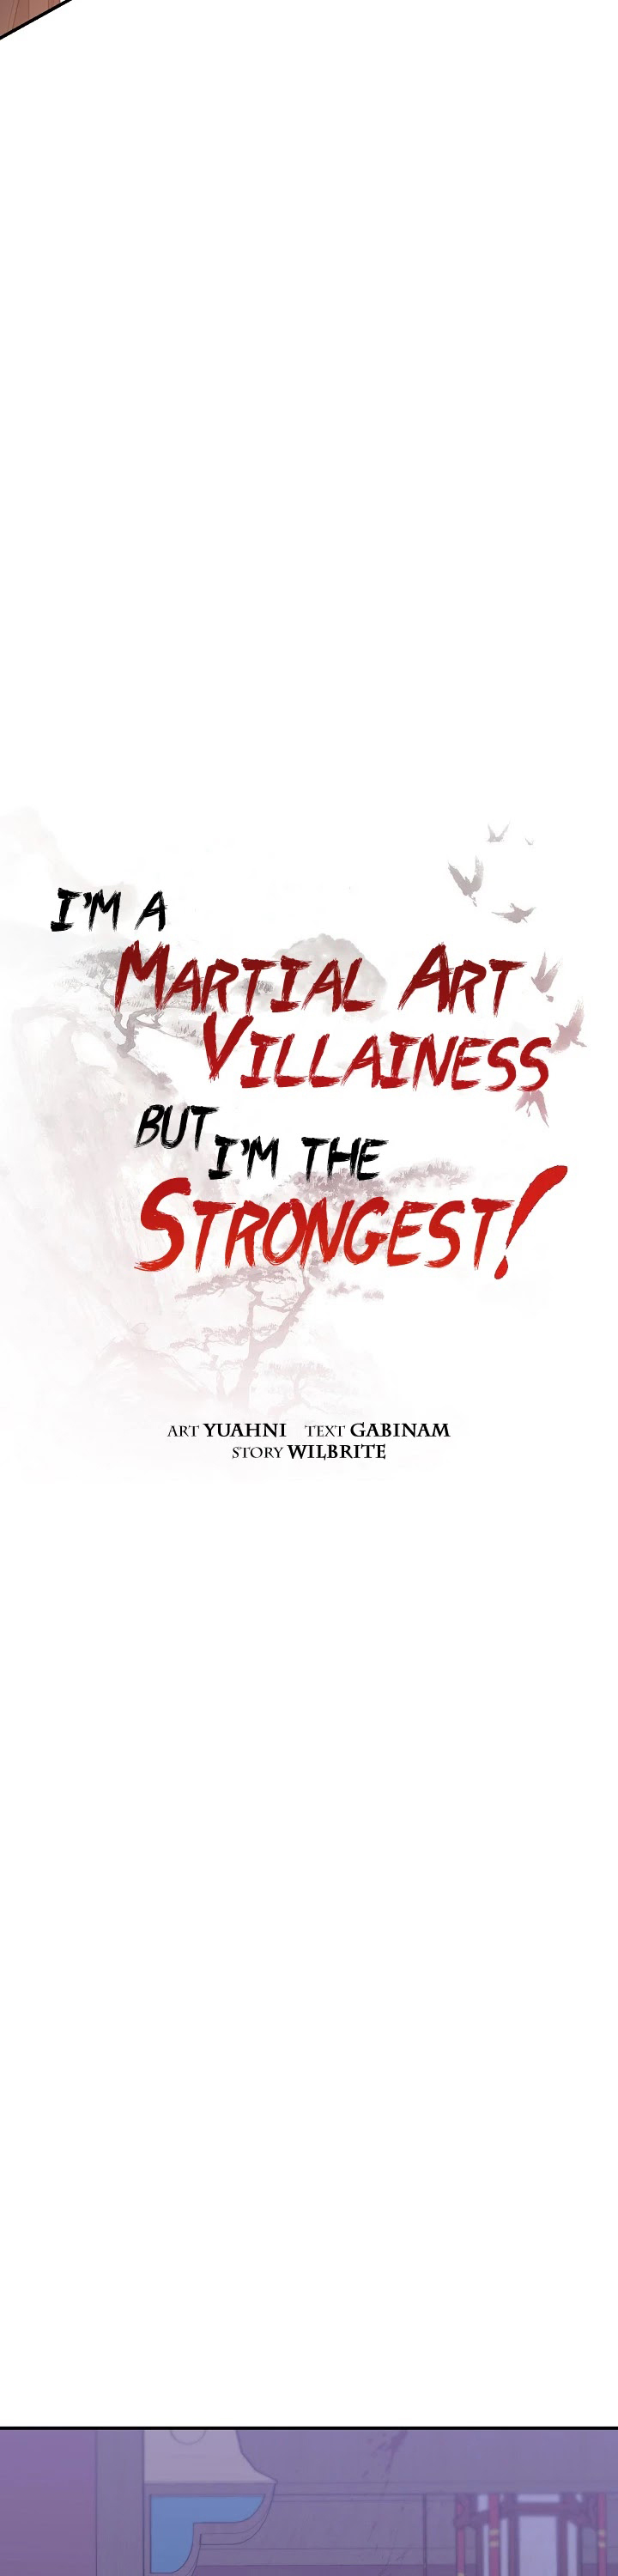 I’m a Martial Art Villainess, but I’m the Strongest! 59 (10)